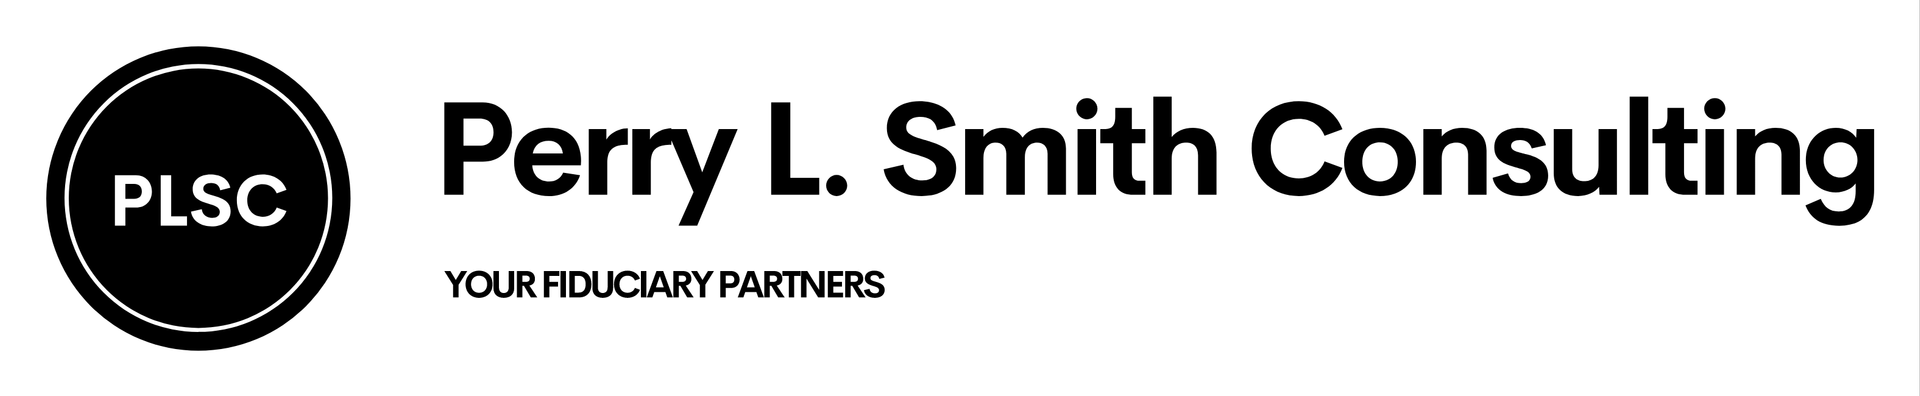 Perry L. Smith Consulting